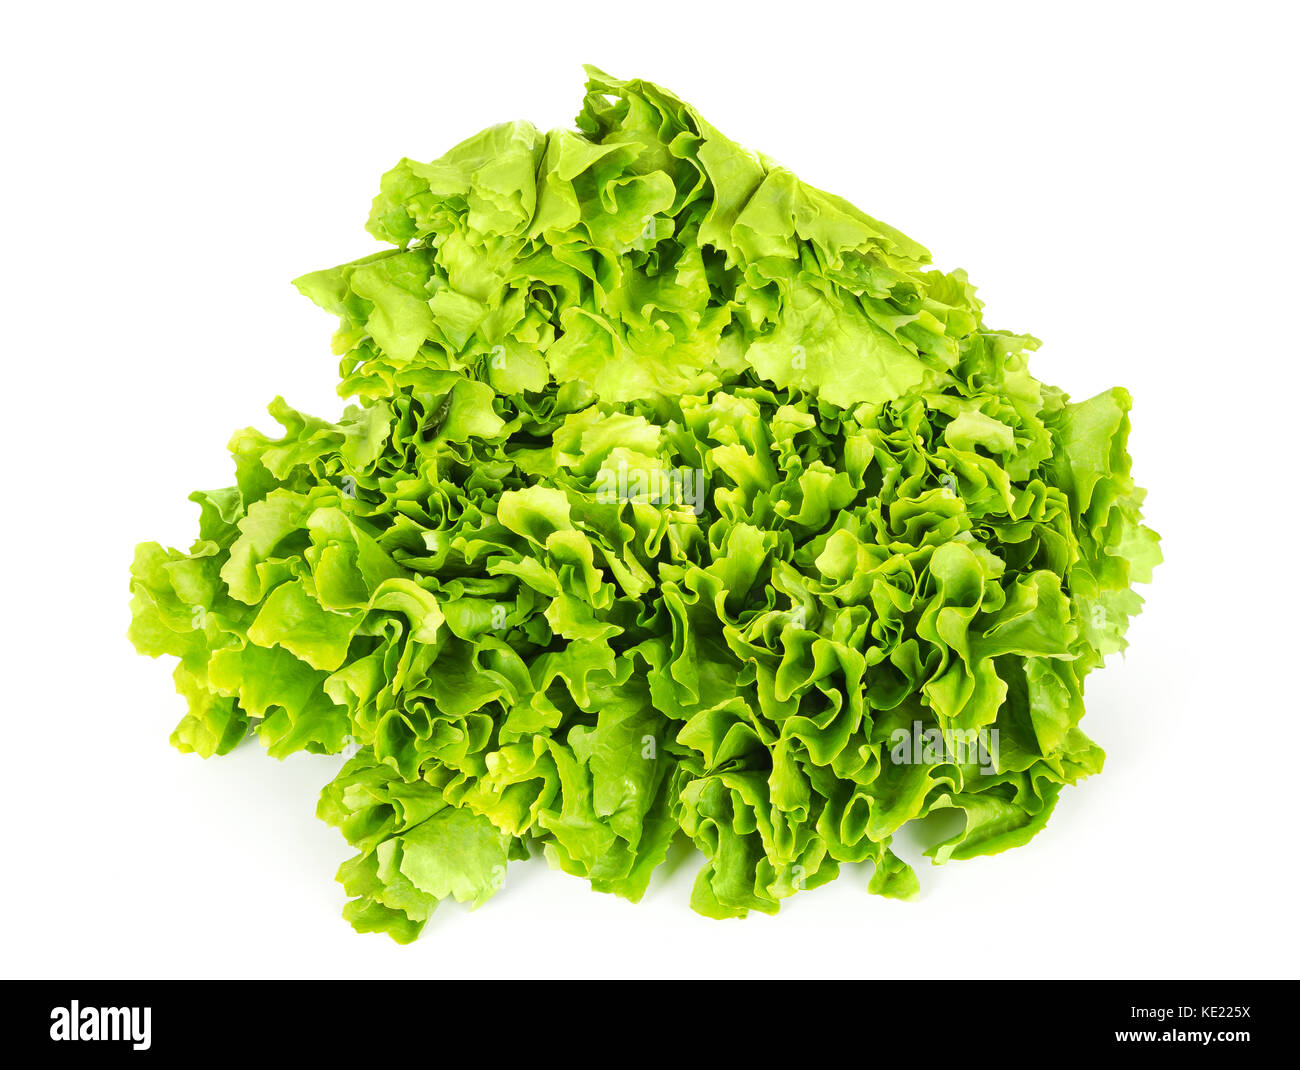 Escarole endive front view over white. Leaf vegetable and lettuce with broad, bitter leaves. Cichorium endivia var latifolia. Green salad head. Stock Photo